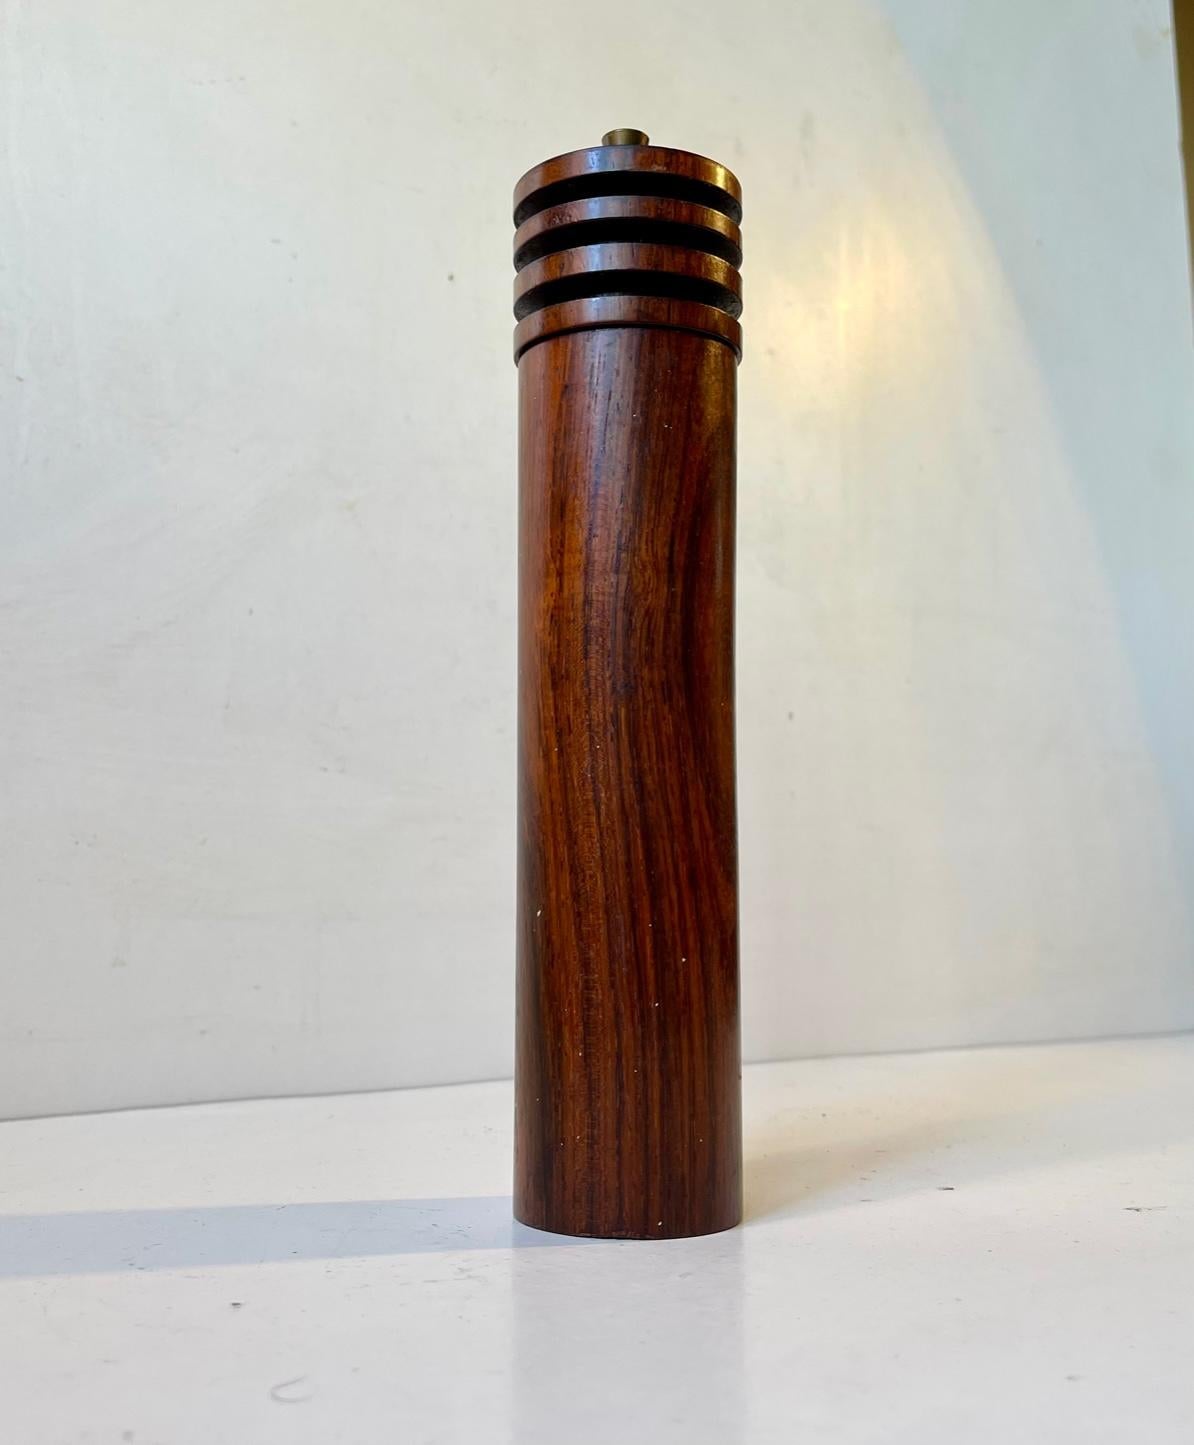 A wellmade decently sized solid rosewood pepper mill with steel interior/mechanism by Peugeot. It was designed by danish designer Sven Petersen and manufactured at his own shop: SAAP. Please note that Cites is not required of this type of Rosewood